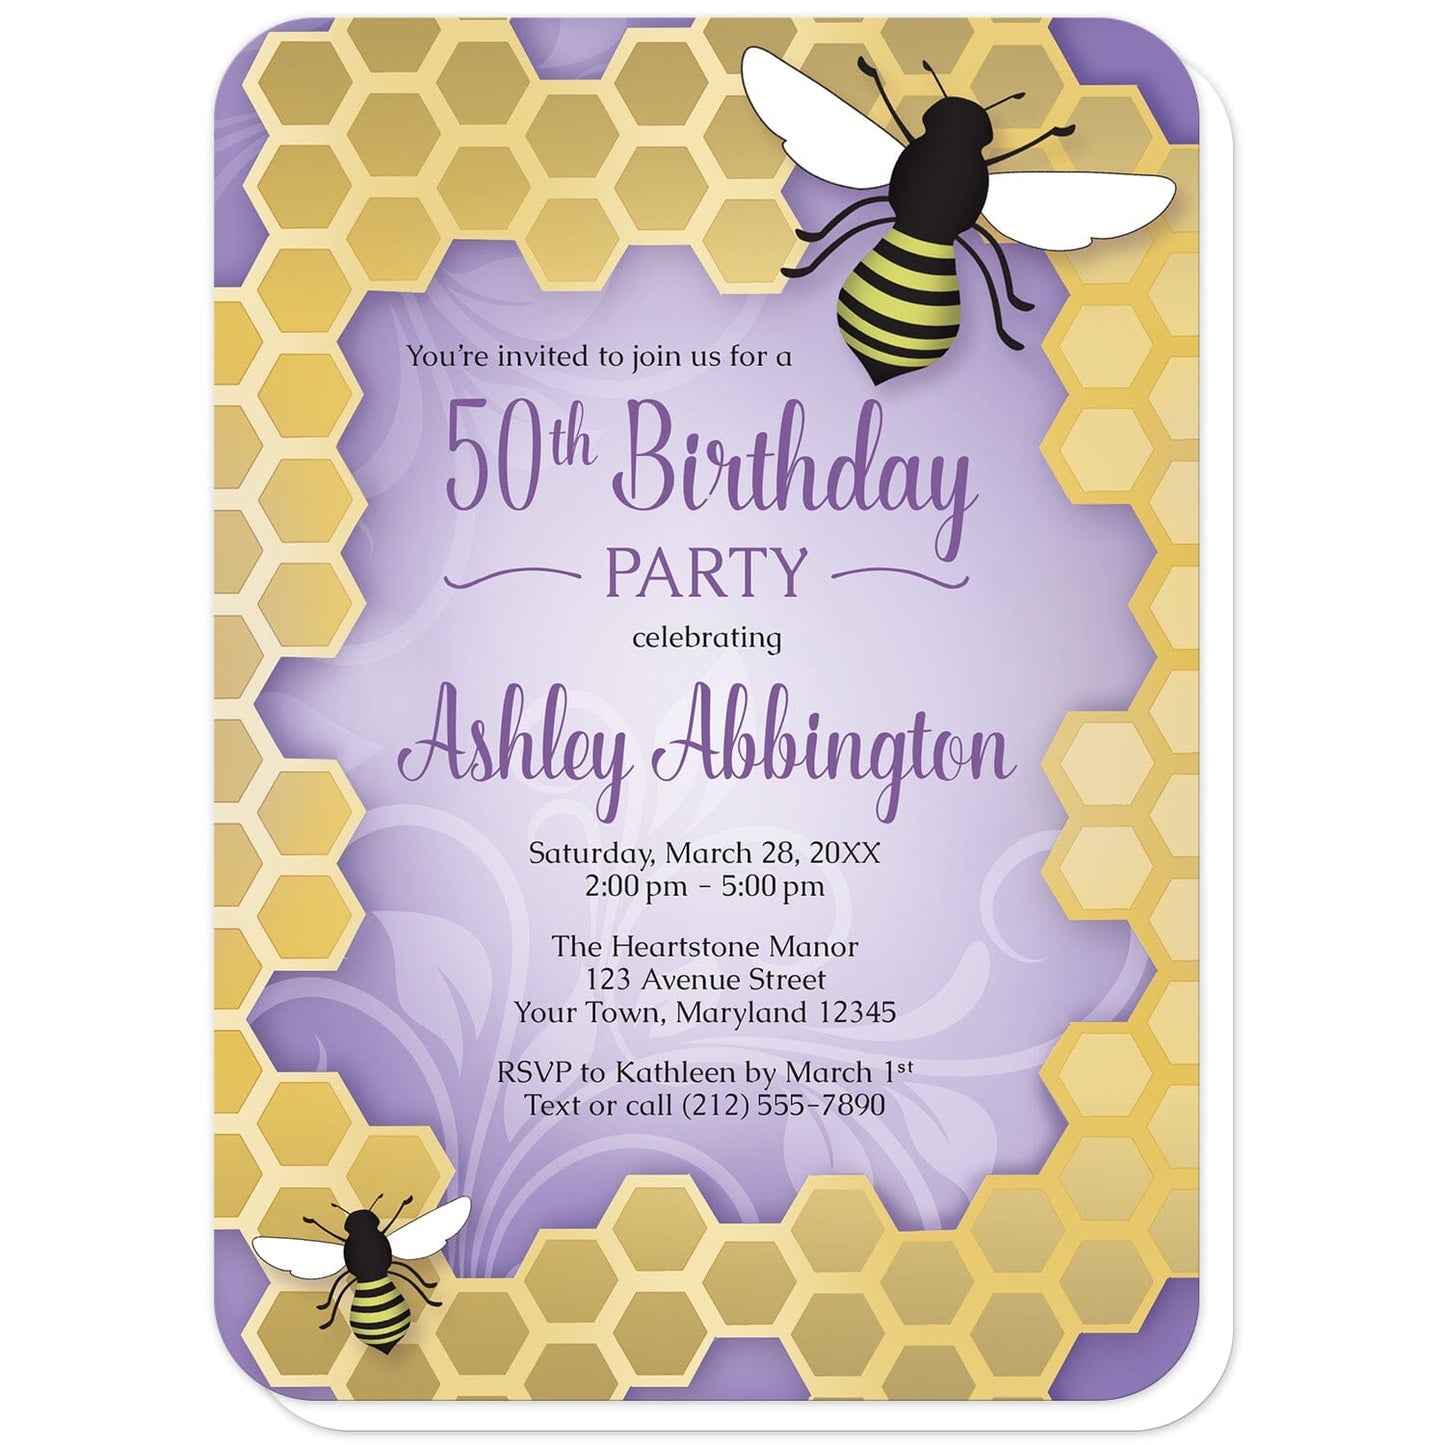 Bumble Bee Party Ideas  Bee party, Bee birthday invitations, Bee party  decorations